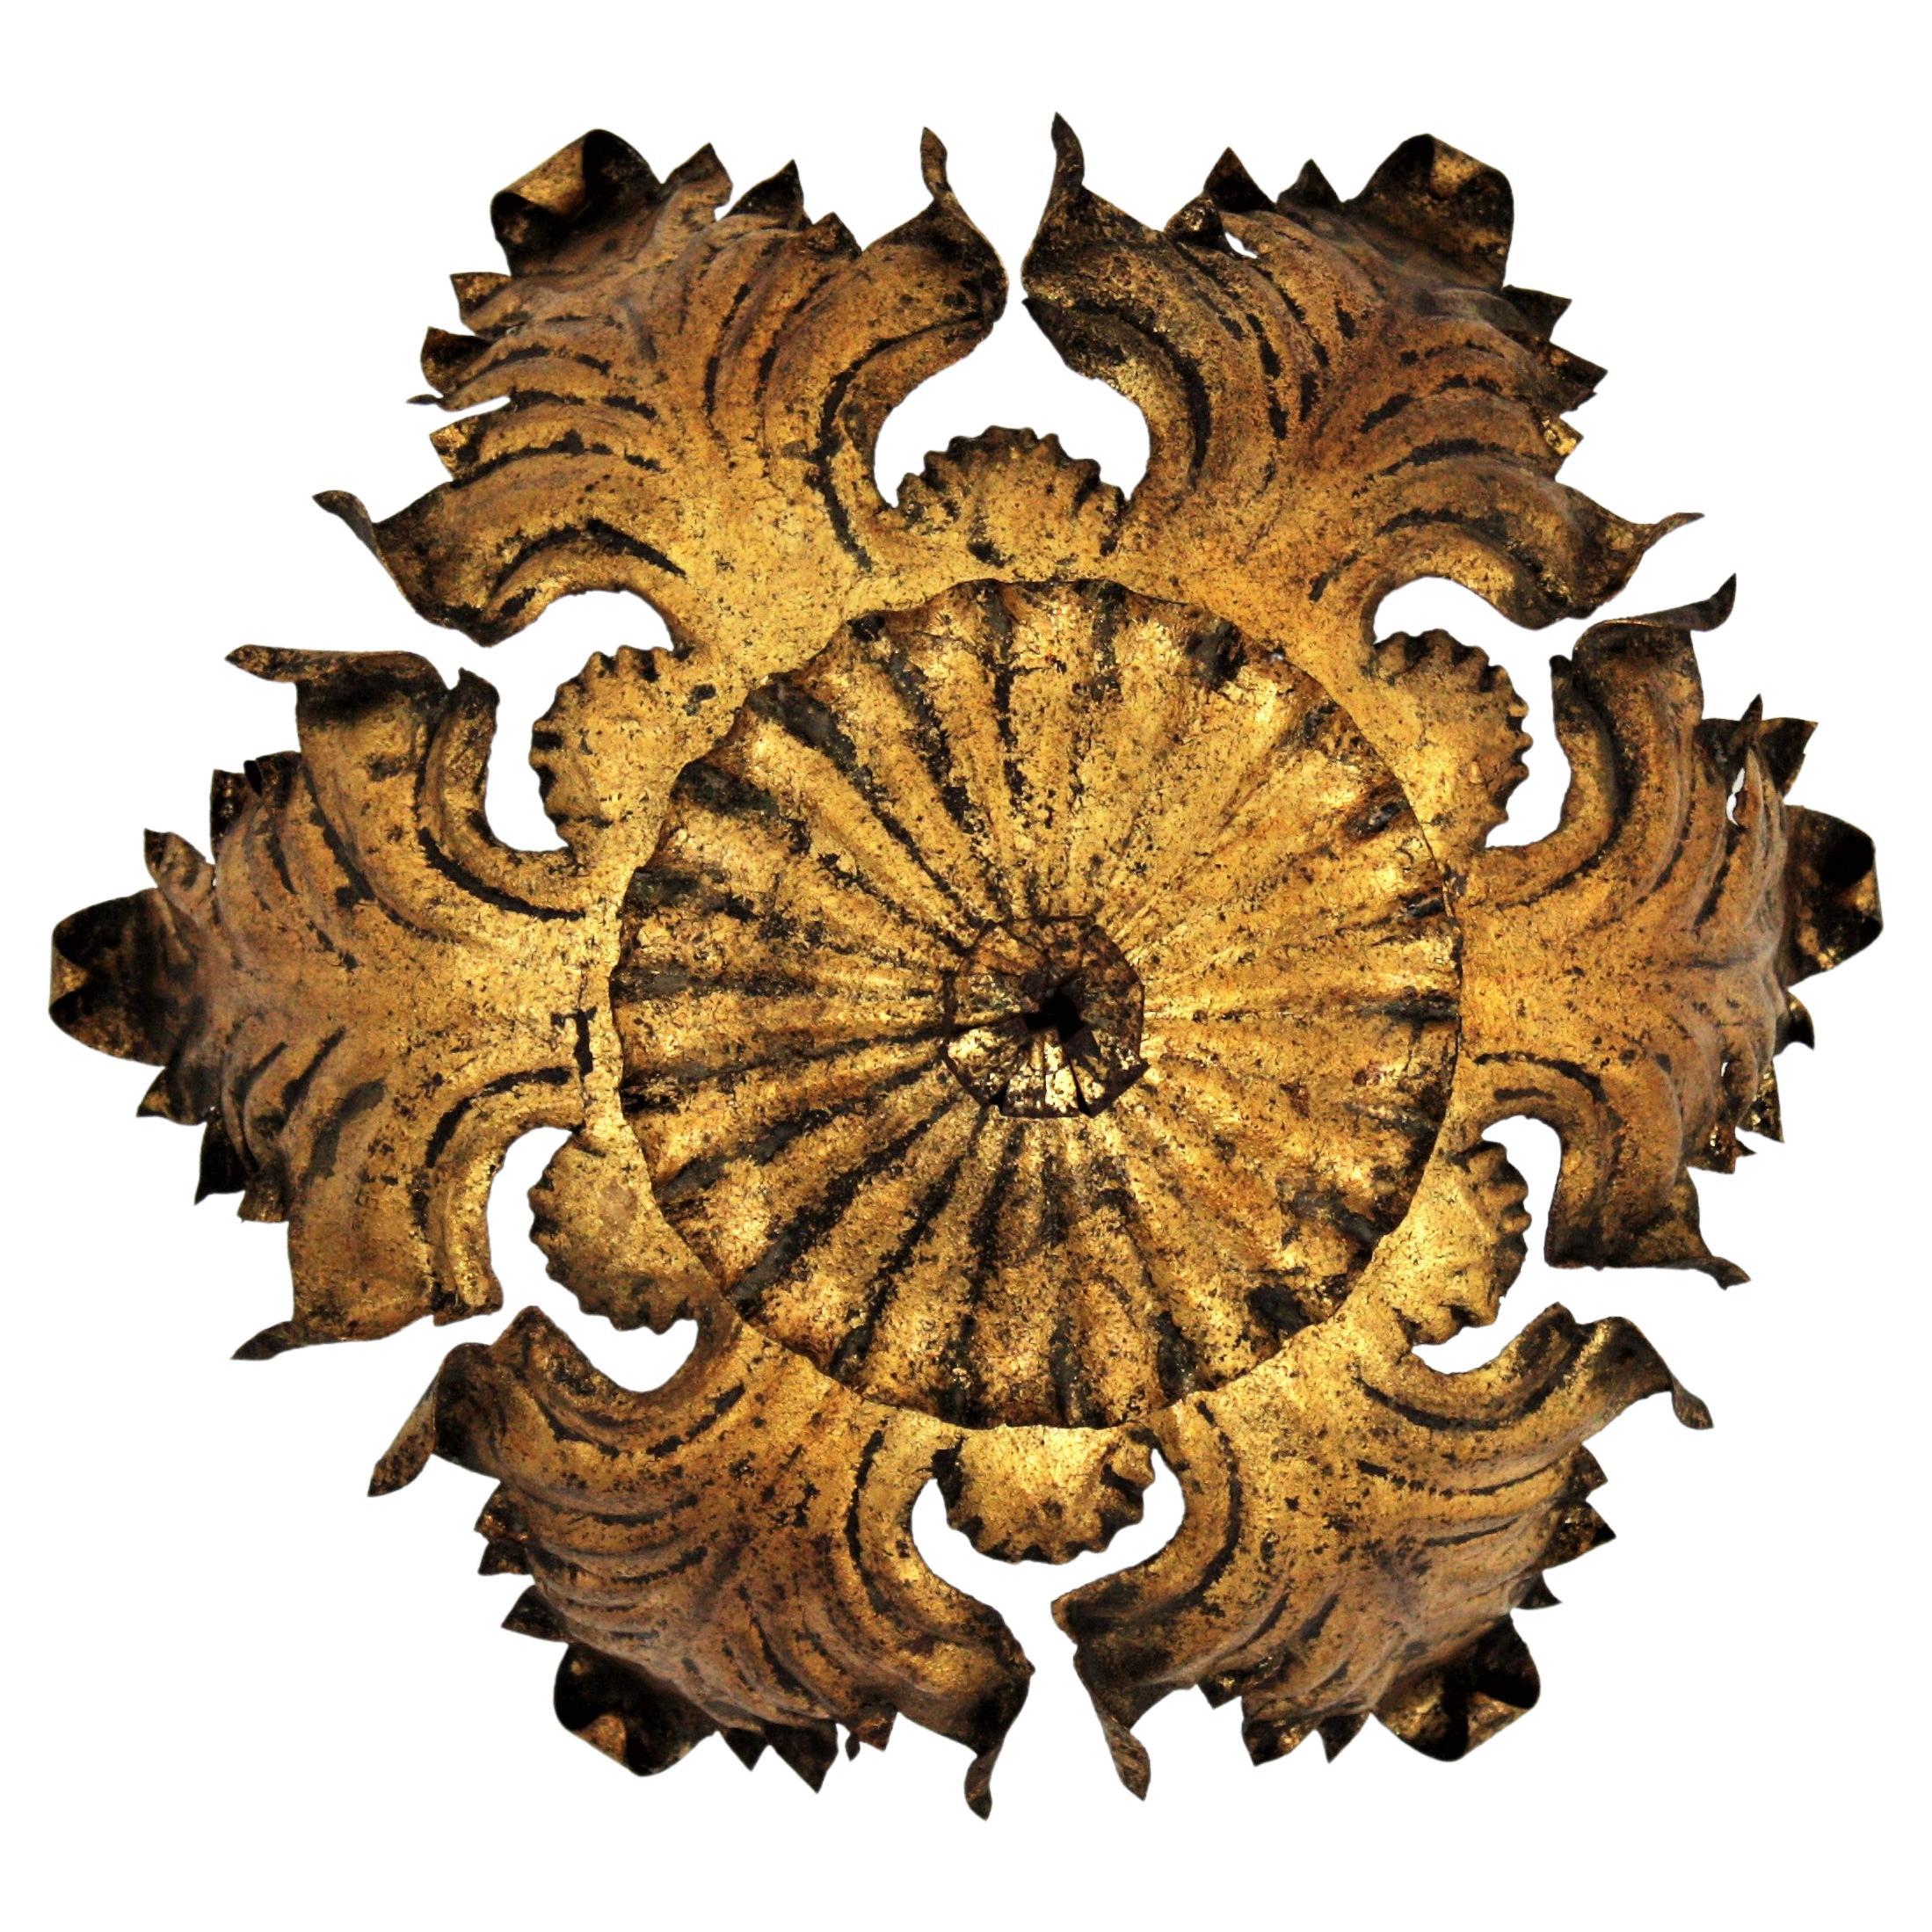 Wrought iron gilt leafed sunburst ceiling light fixture or pendant, Italy, 1940s.
This sunburst light fixture features an ornamented leafed structure hanging from a stem ended by a canopy. It has heavily adorned and retains a nice aged patina with